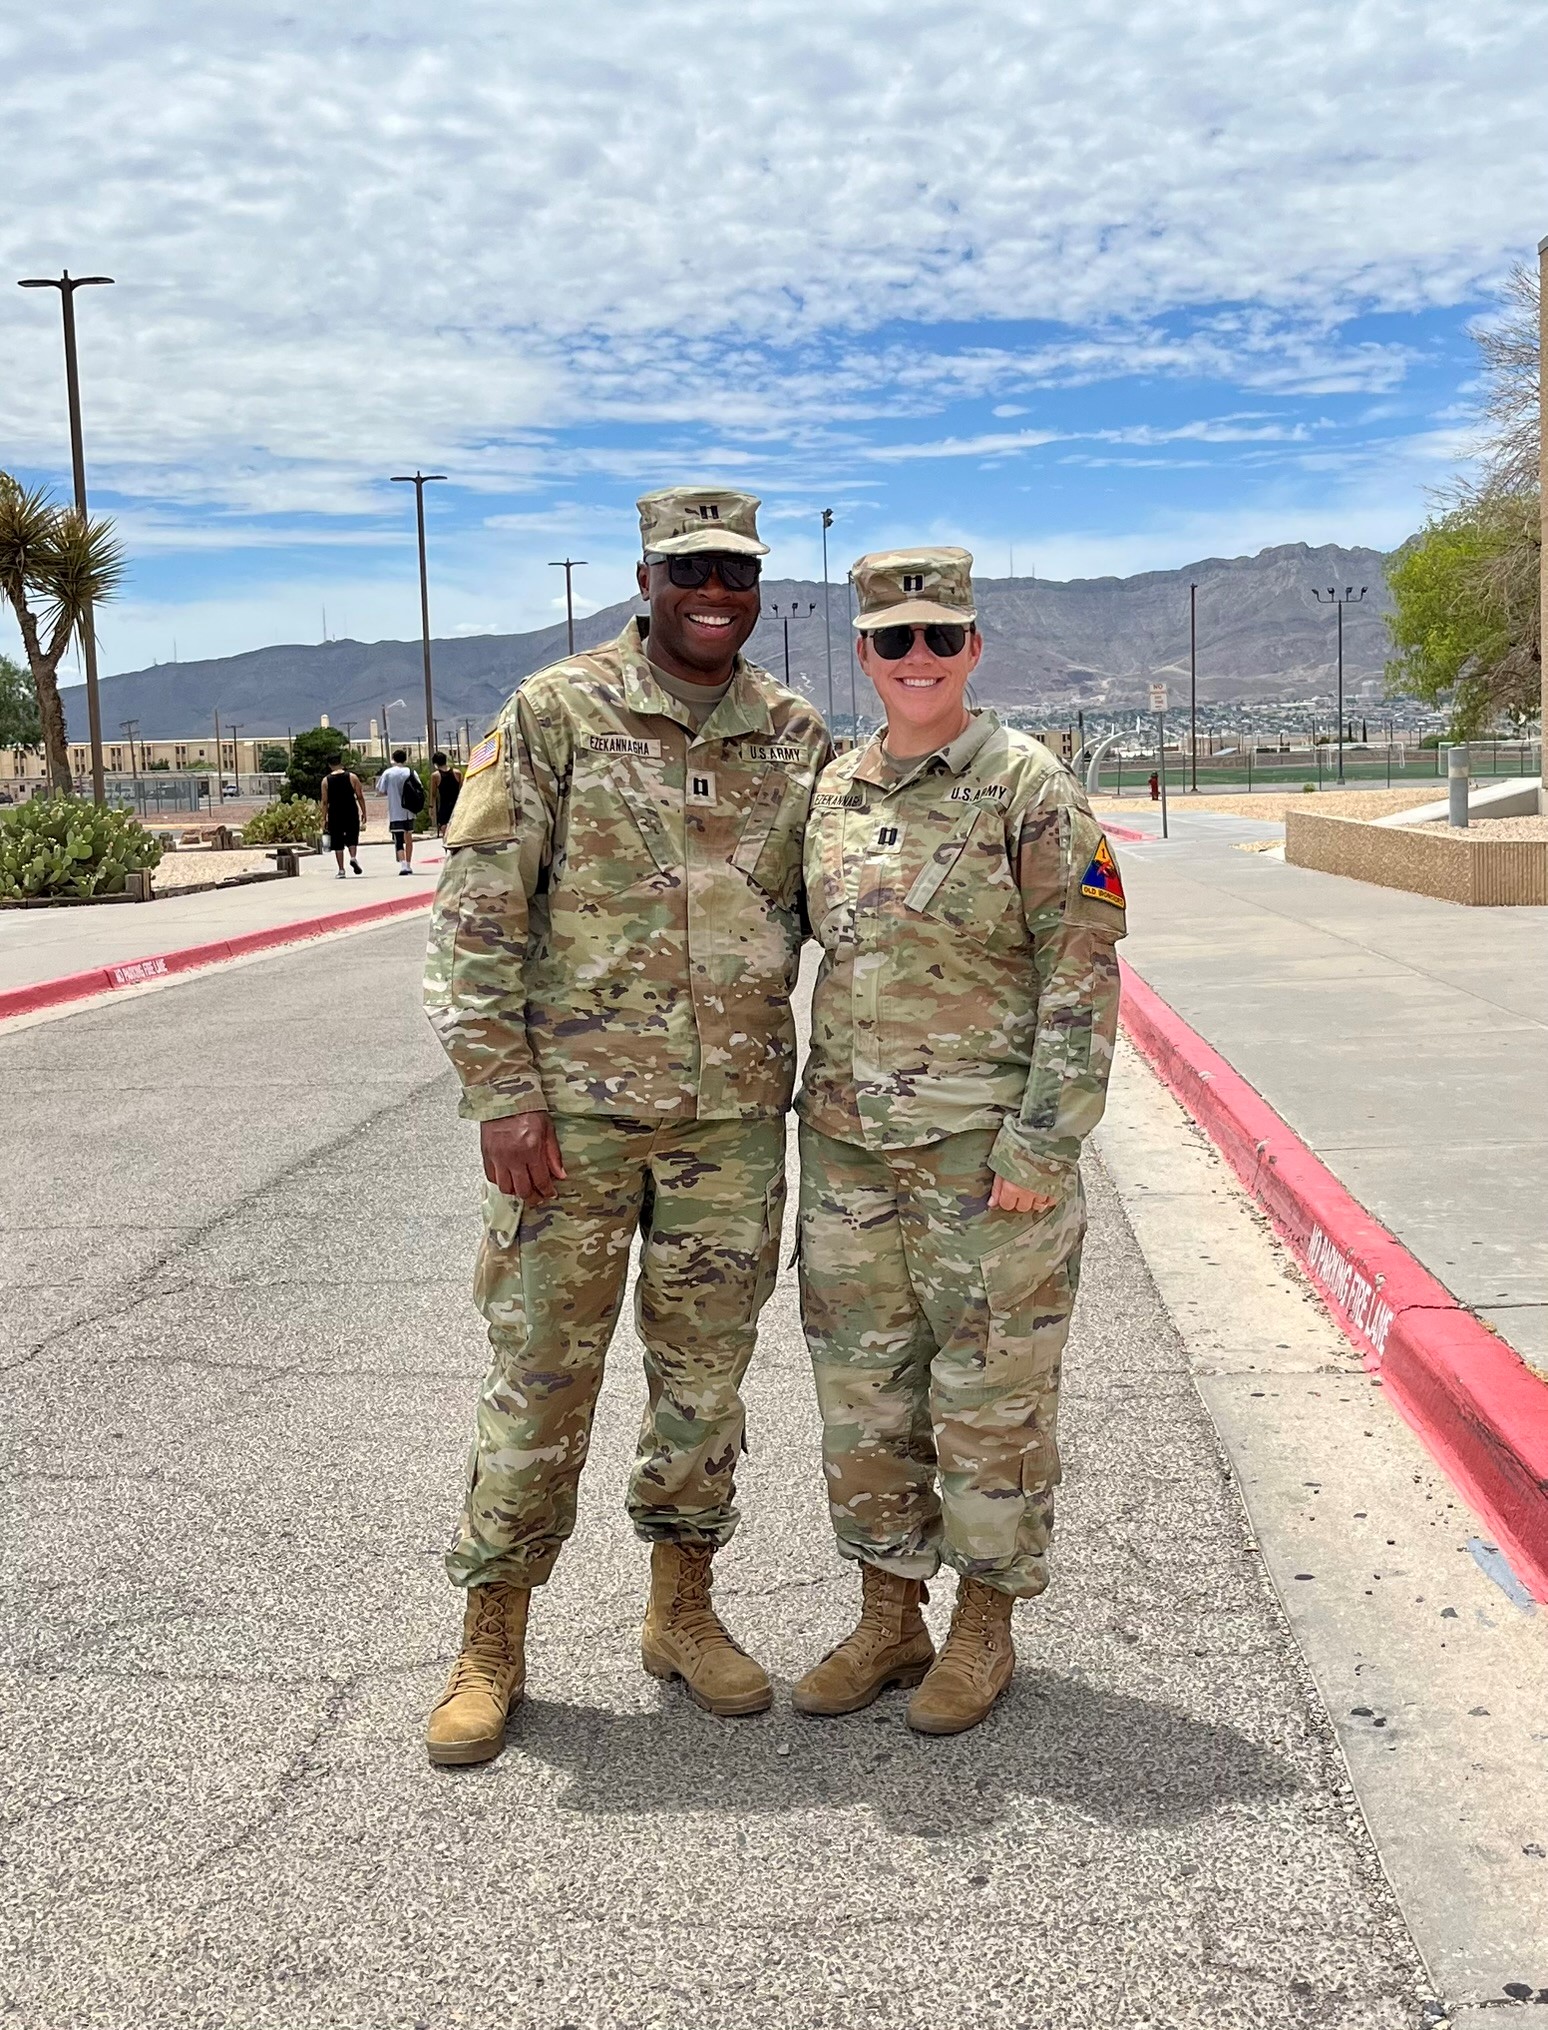 Meghan Ezekannagha ’26 with her husband, Chiazo, a Texas McCombs MBA '25, wearing military fatigues and standing side by side